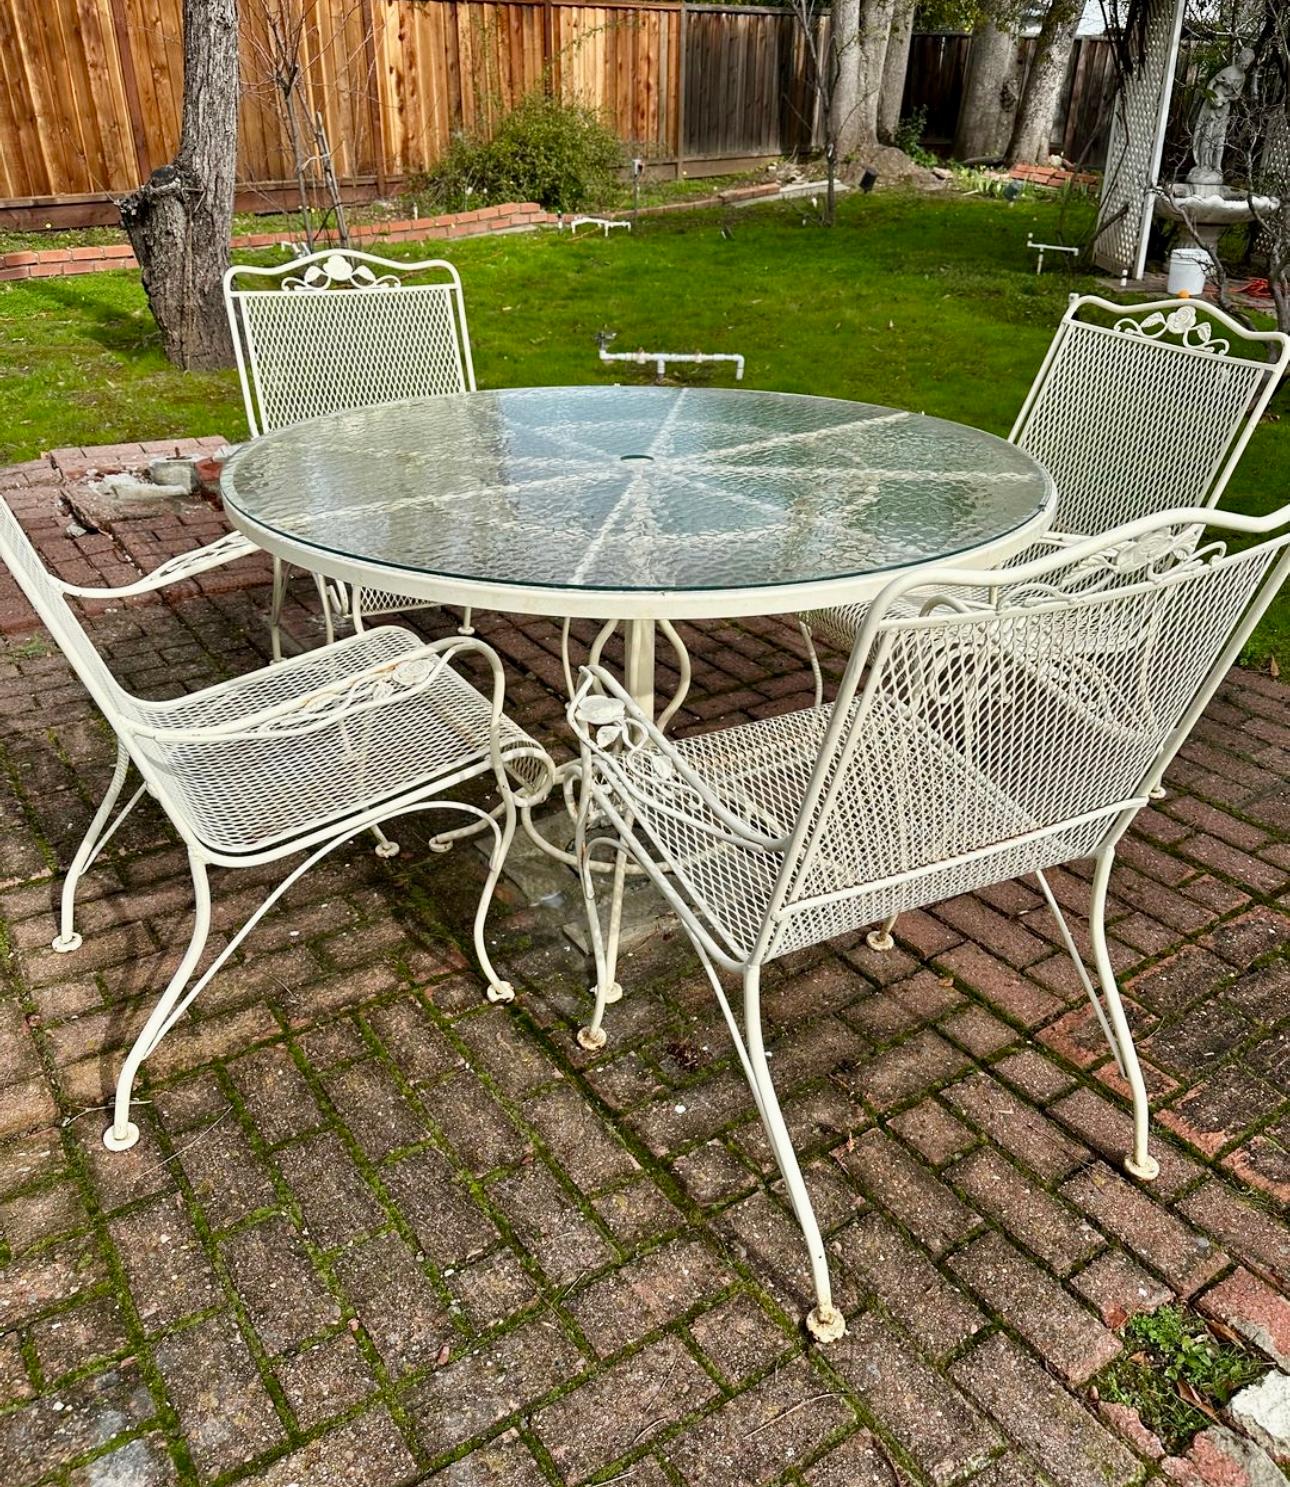 A beautiful vintage patio set by Russell Woodard Salterini collection
Circa 1960’s
Rare pattern to find
Table and 4 armchairs with rose and leaves pattern
Glass top Table is 48